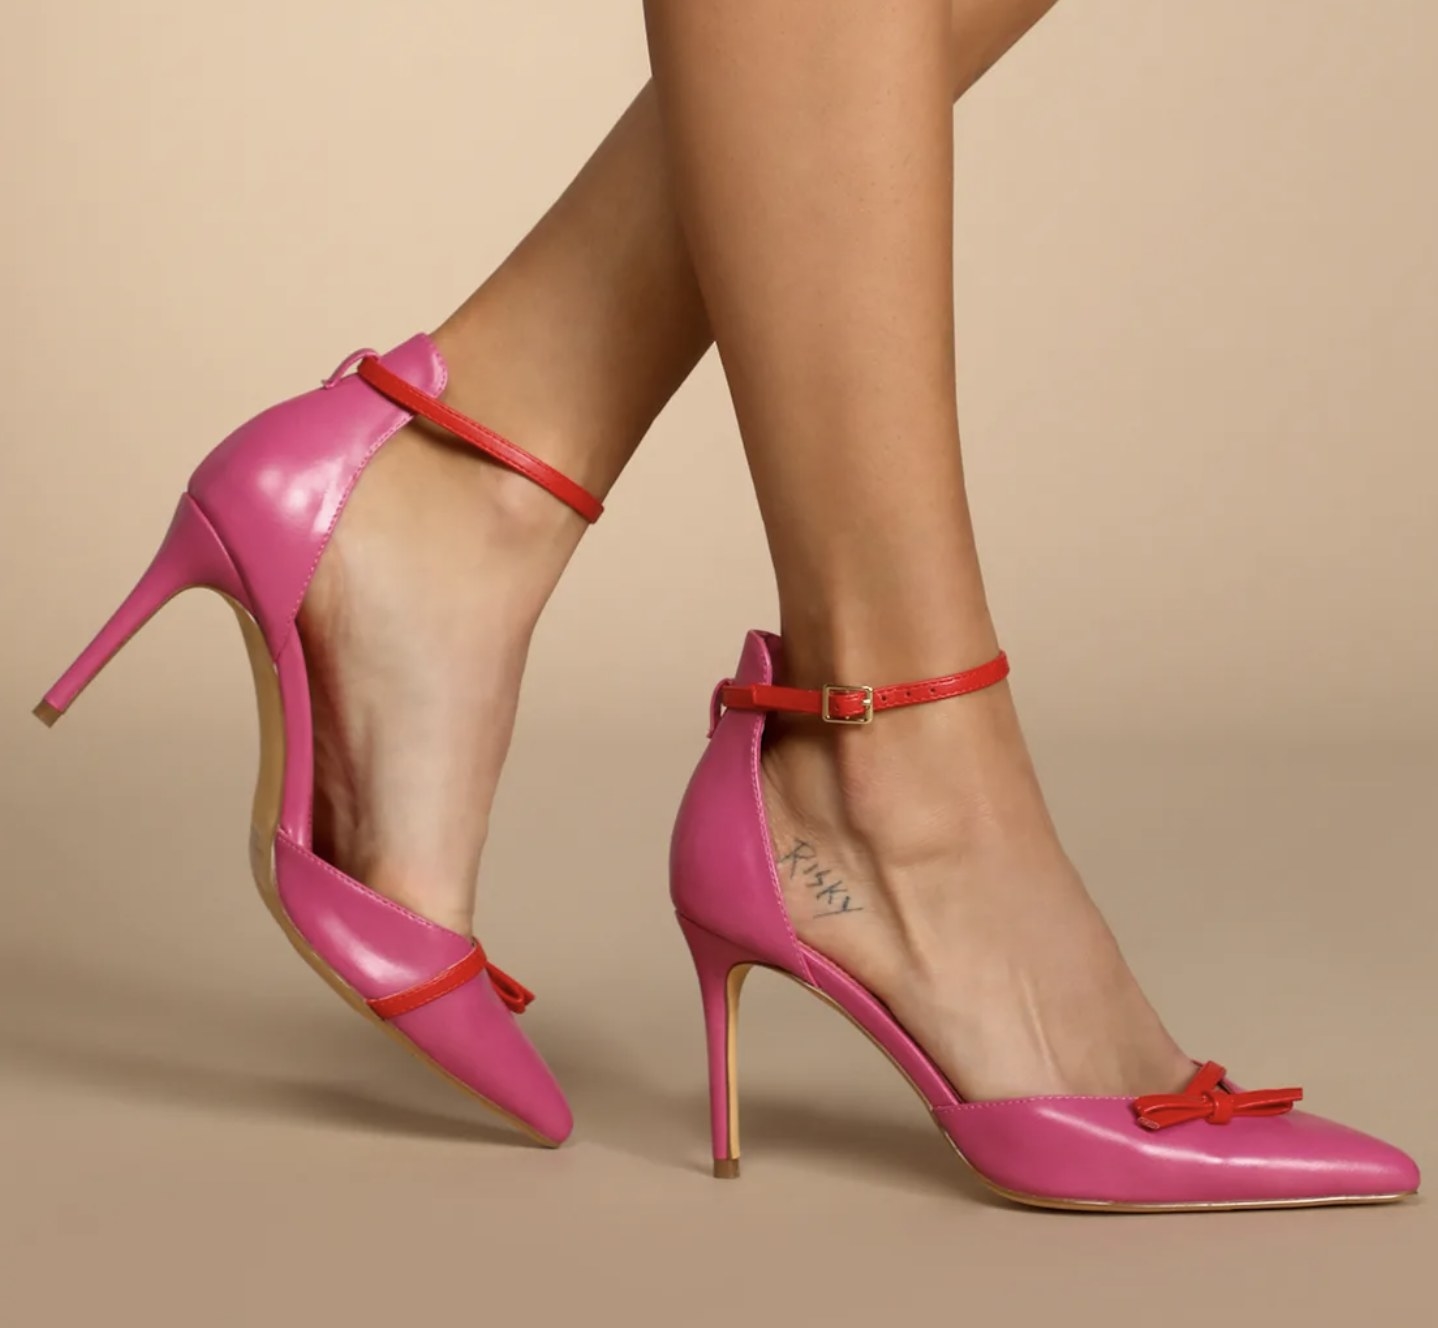 a model wearing the pumps in pink and red